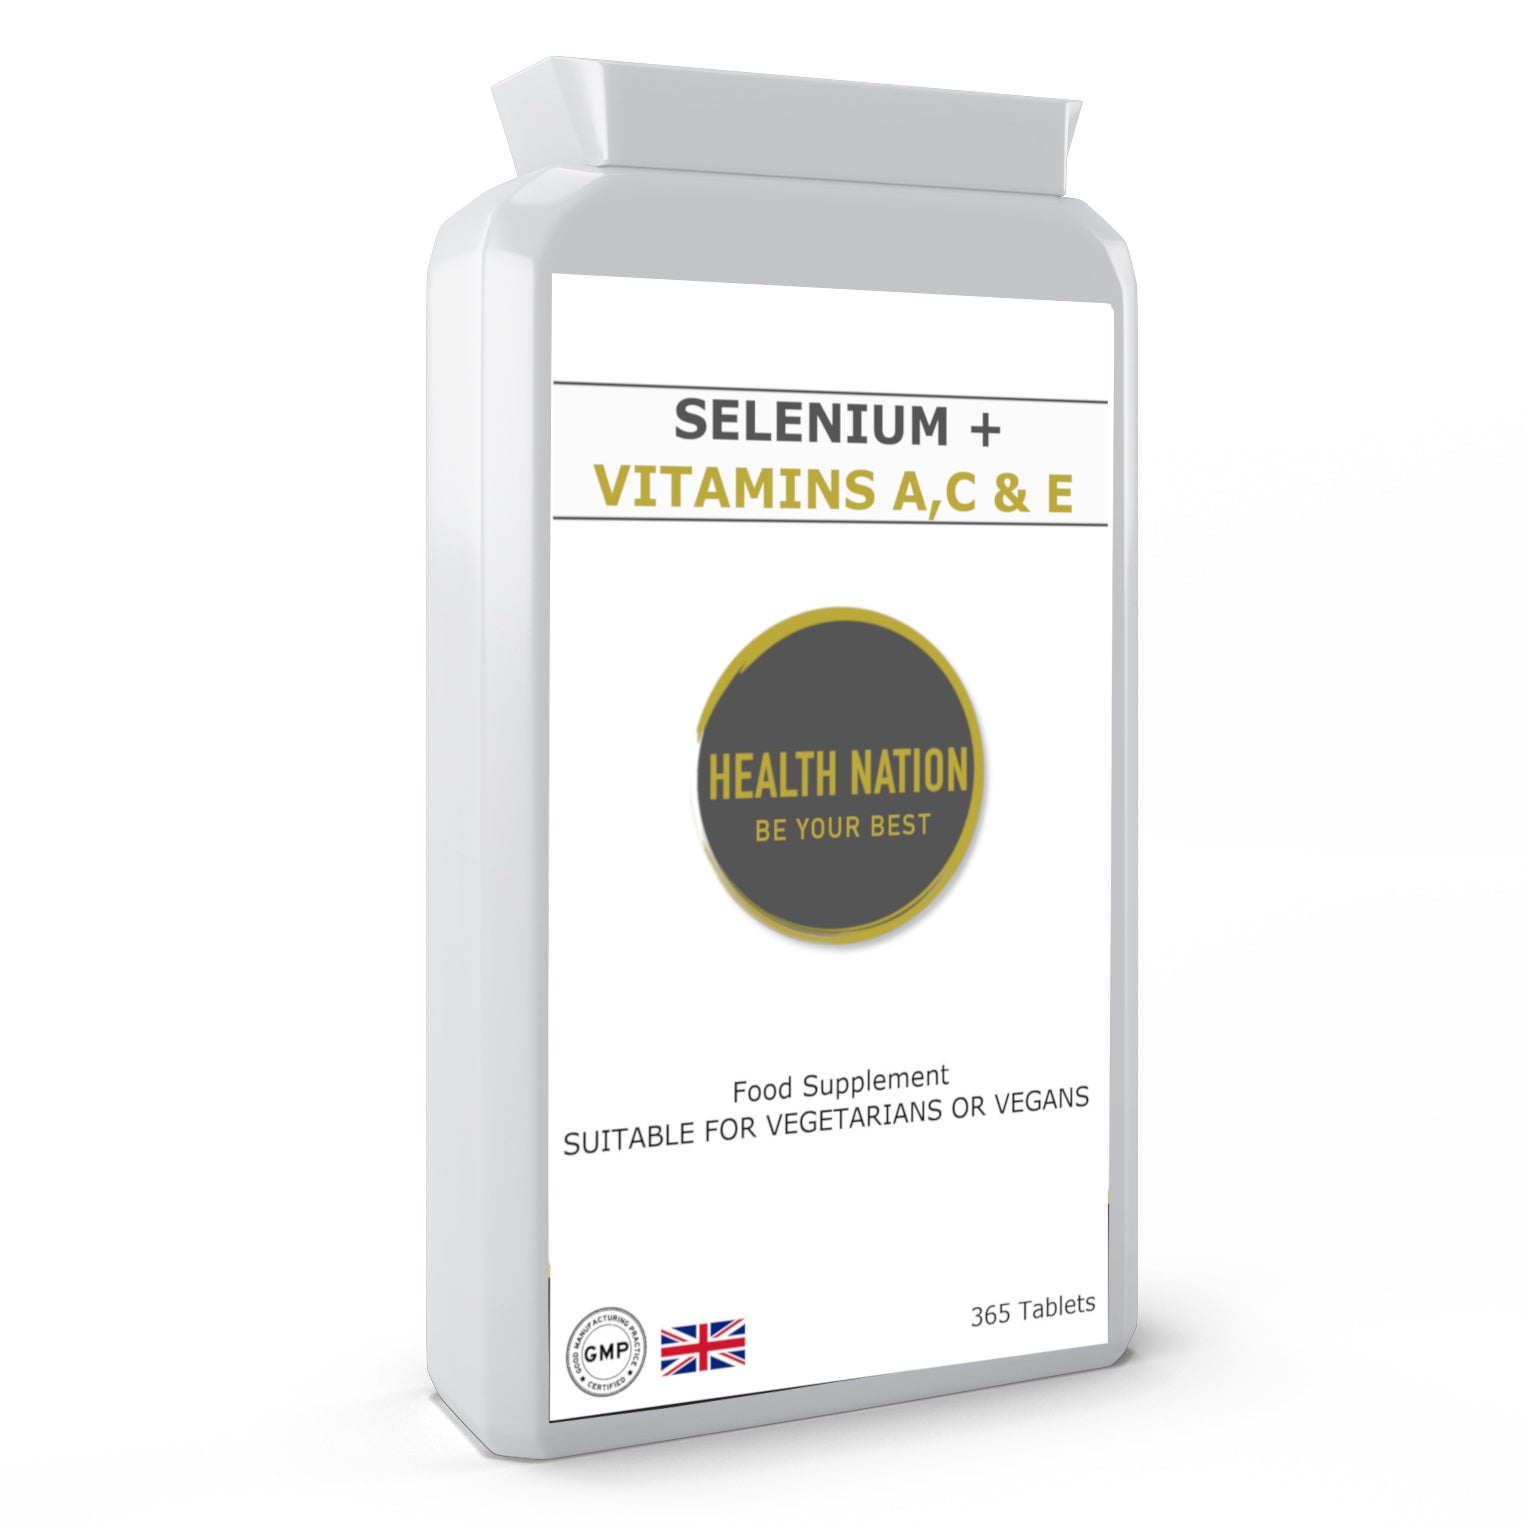 Selenium ACE | Helps with Fertility, Hair, Cold/Flu, Anti-Ageing and Mental Clarity | Made in UK | 365 Tablets - Health Nation